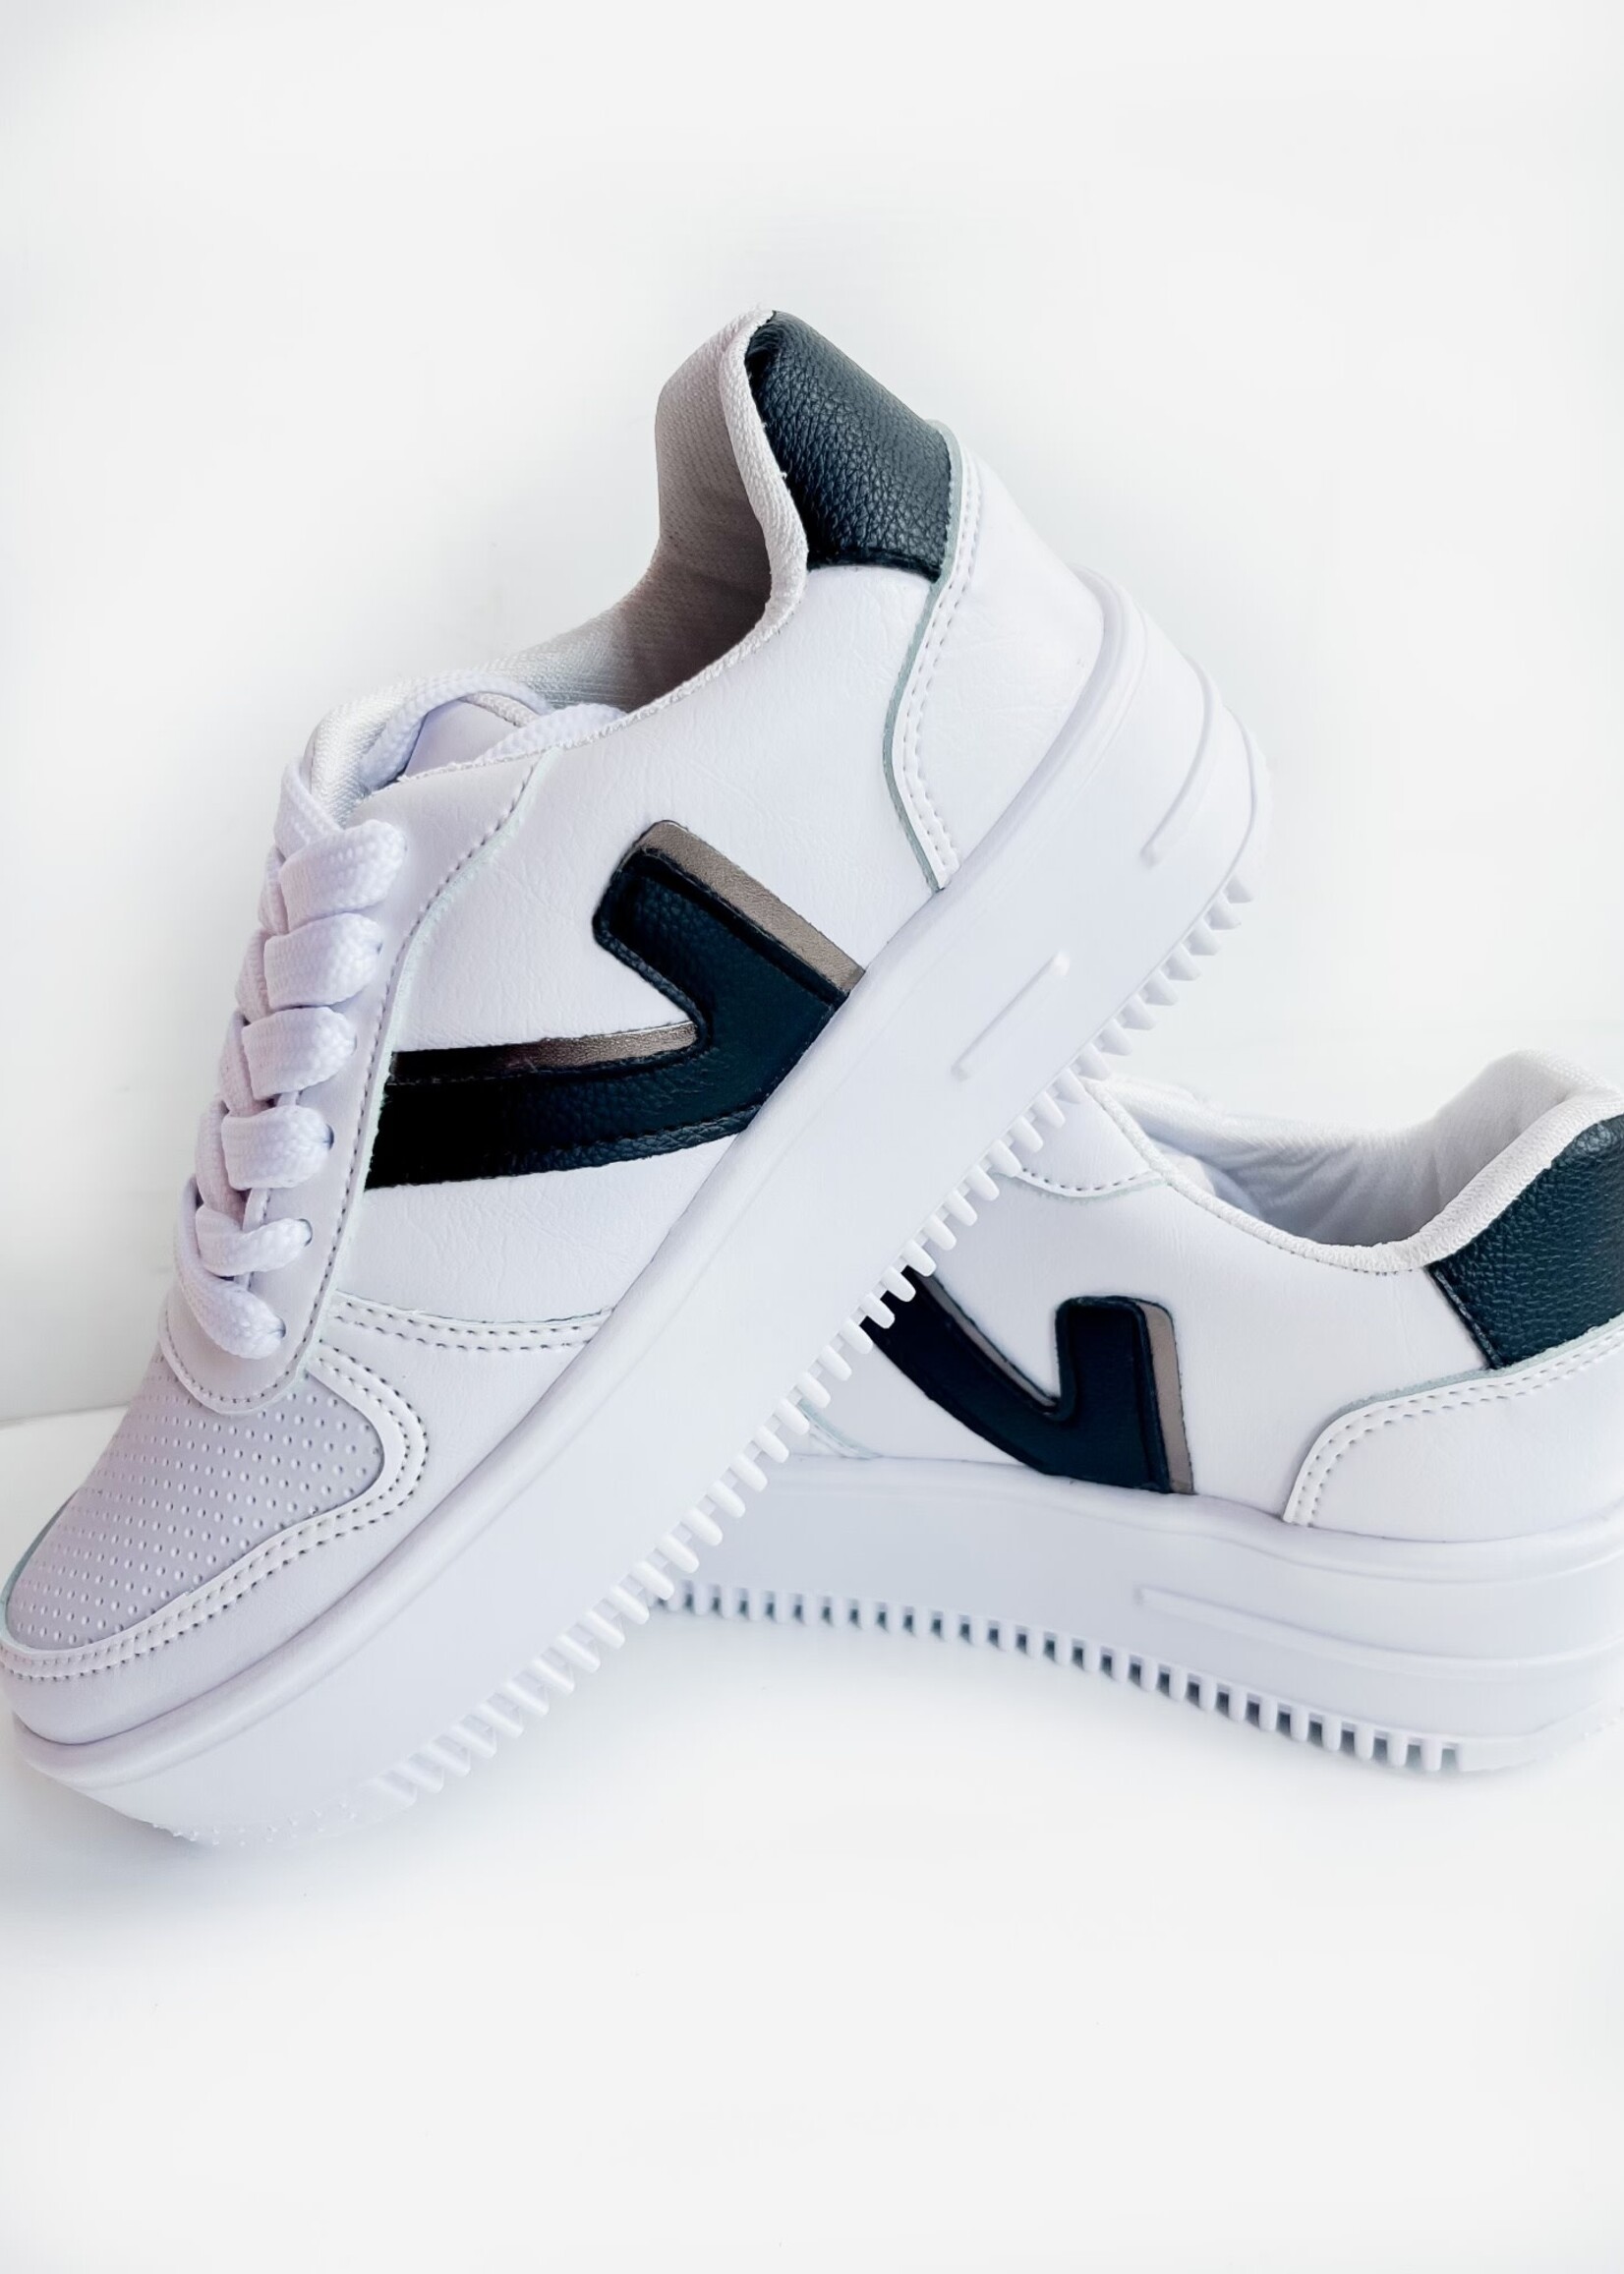 Bloom and Company Viva Black and White Sneaker